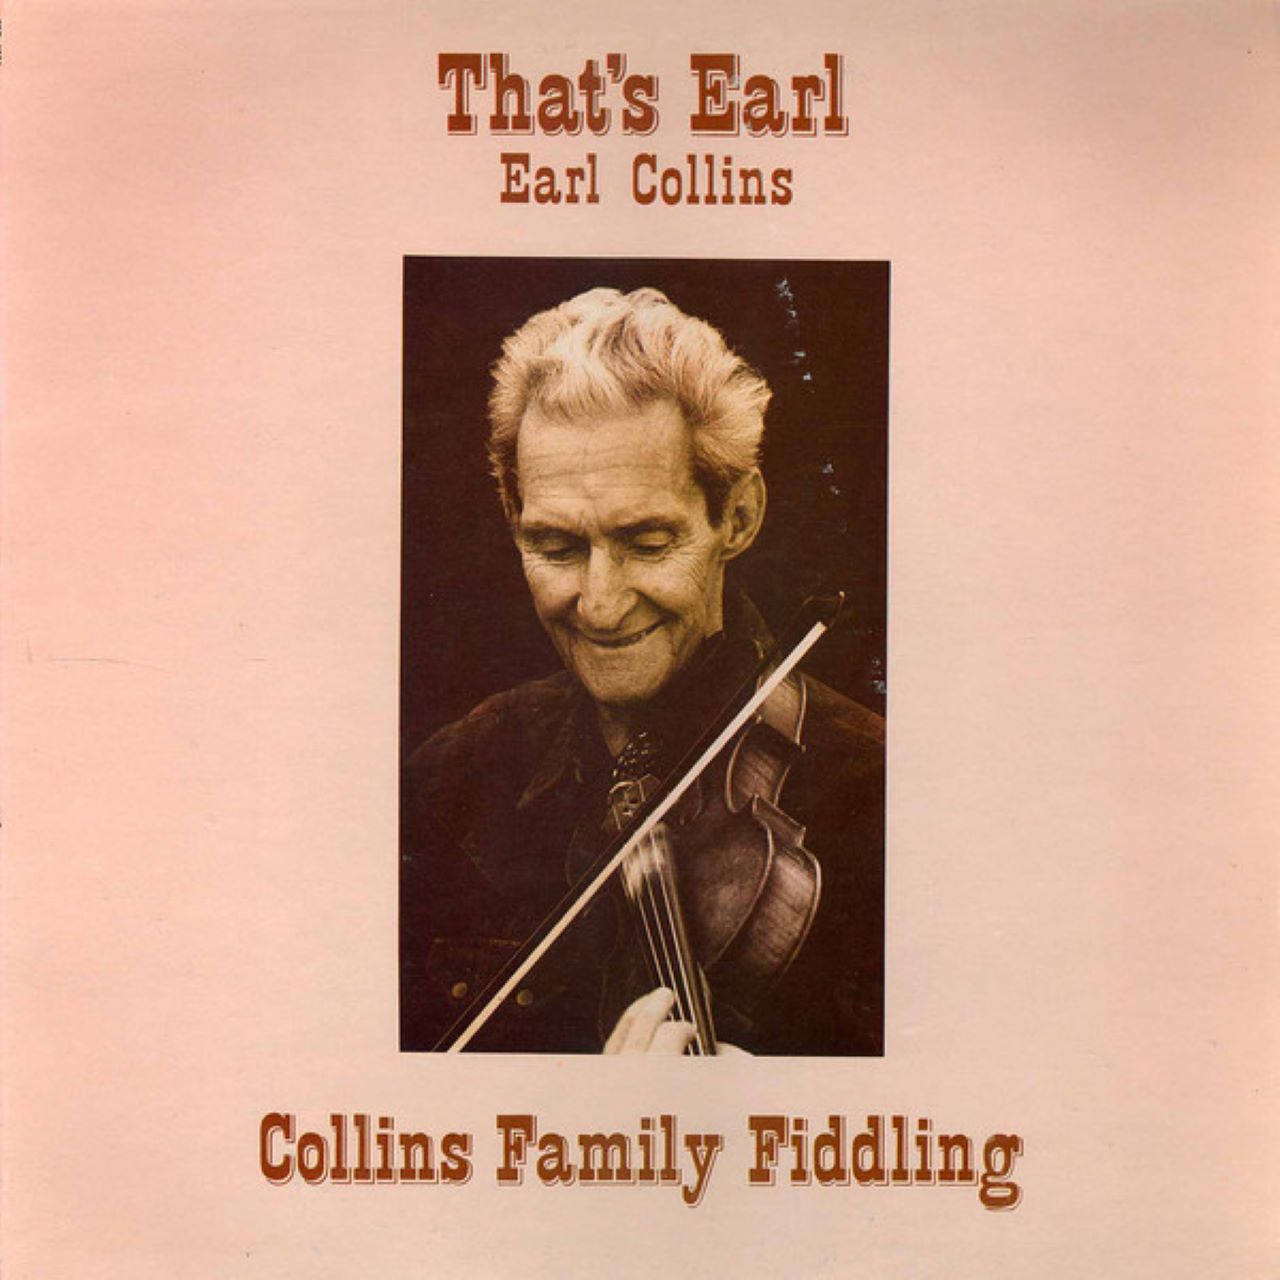 Earl Collins - That's Earl (Collins Family Fiddling) cover album